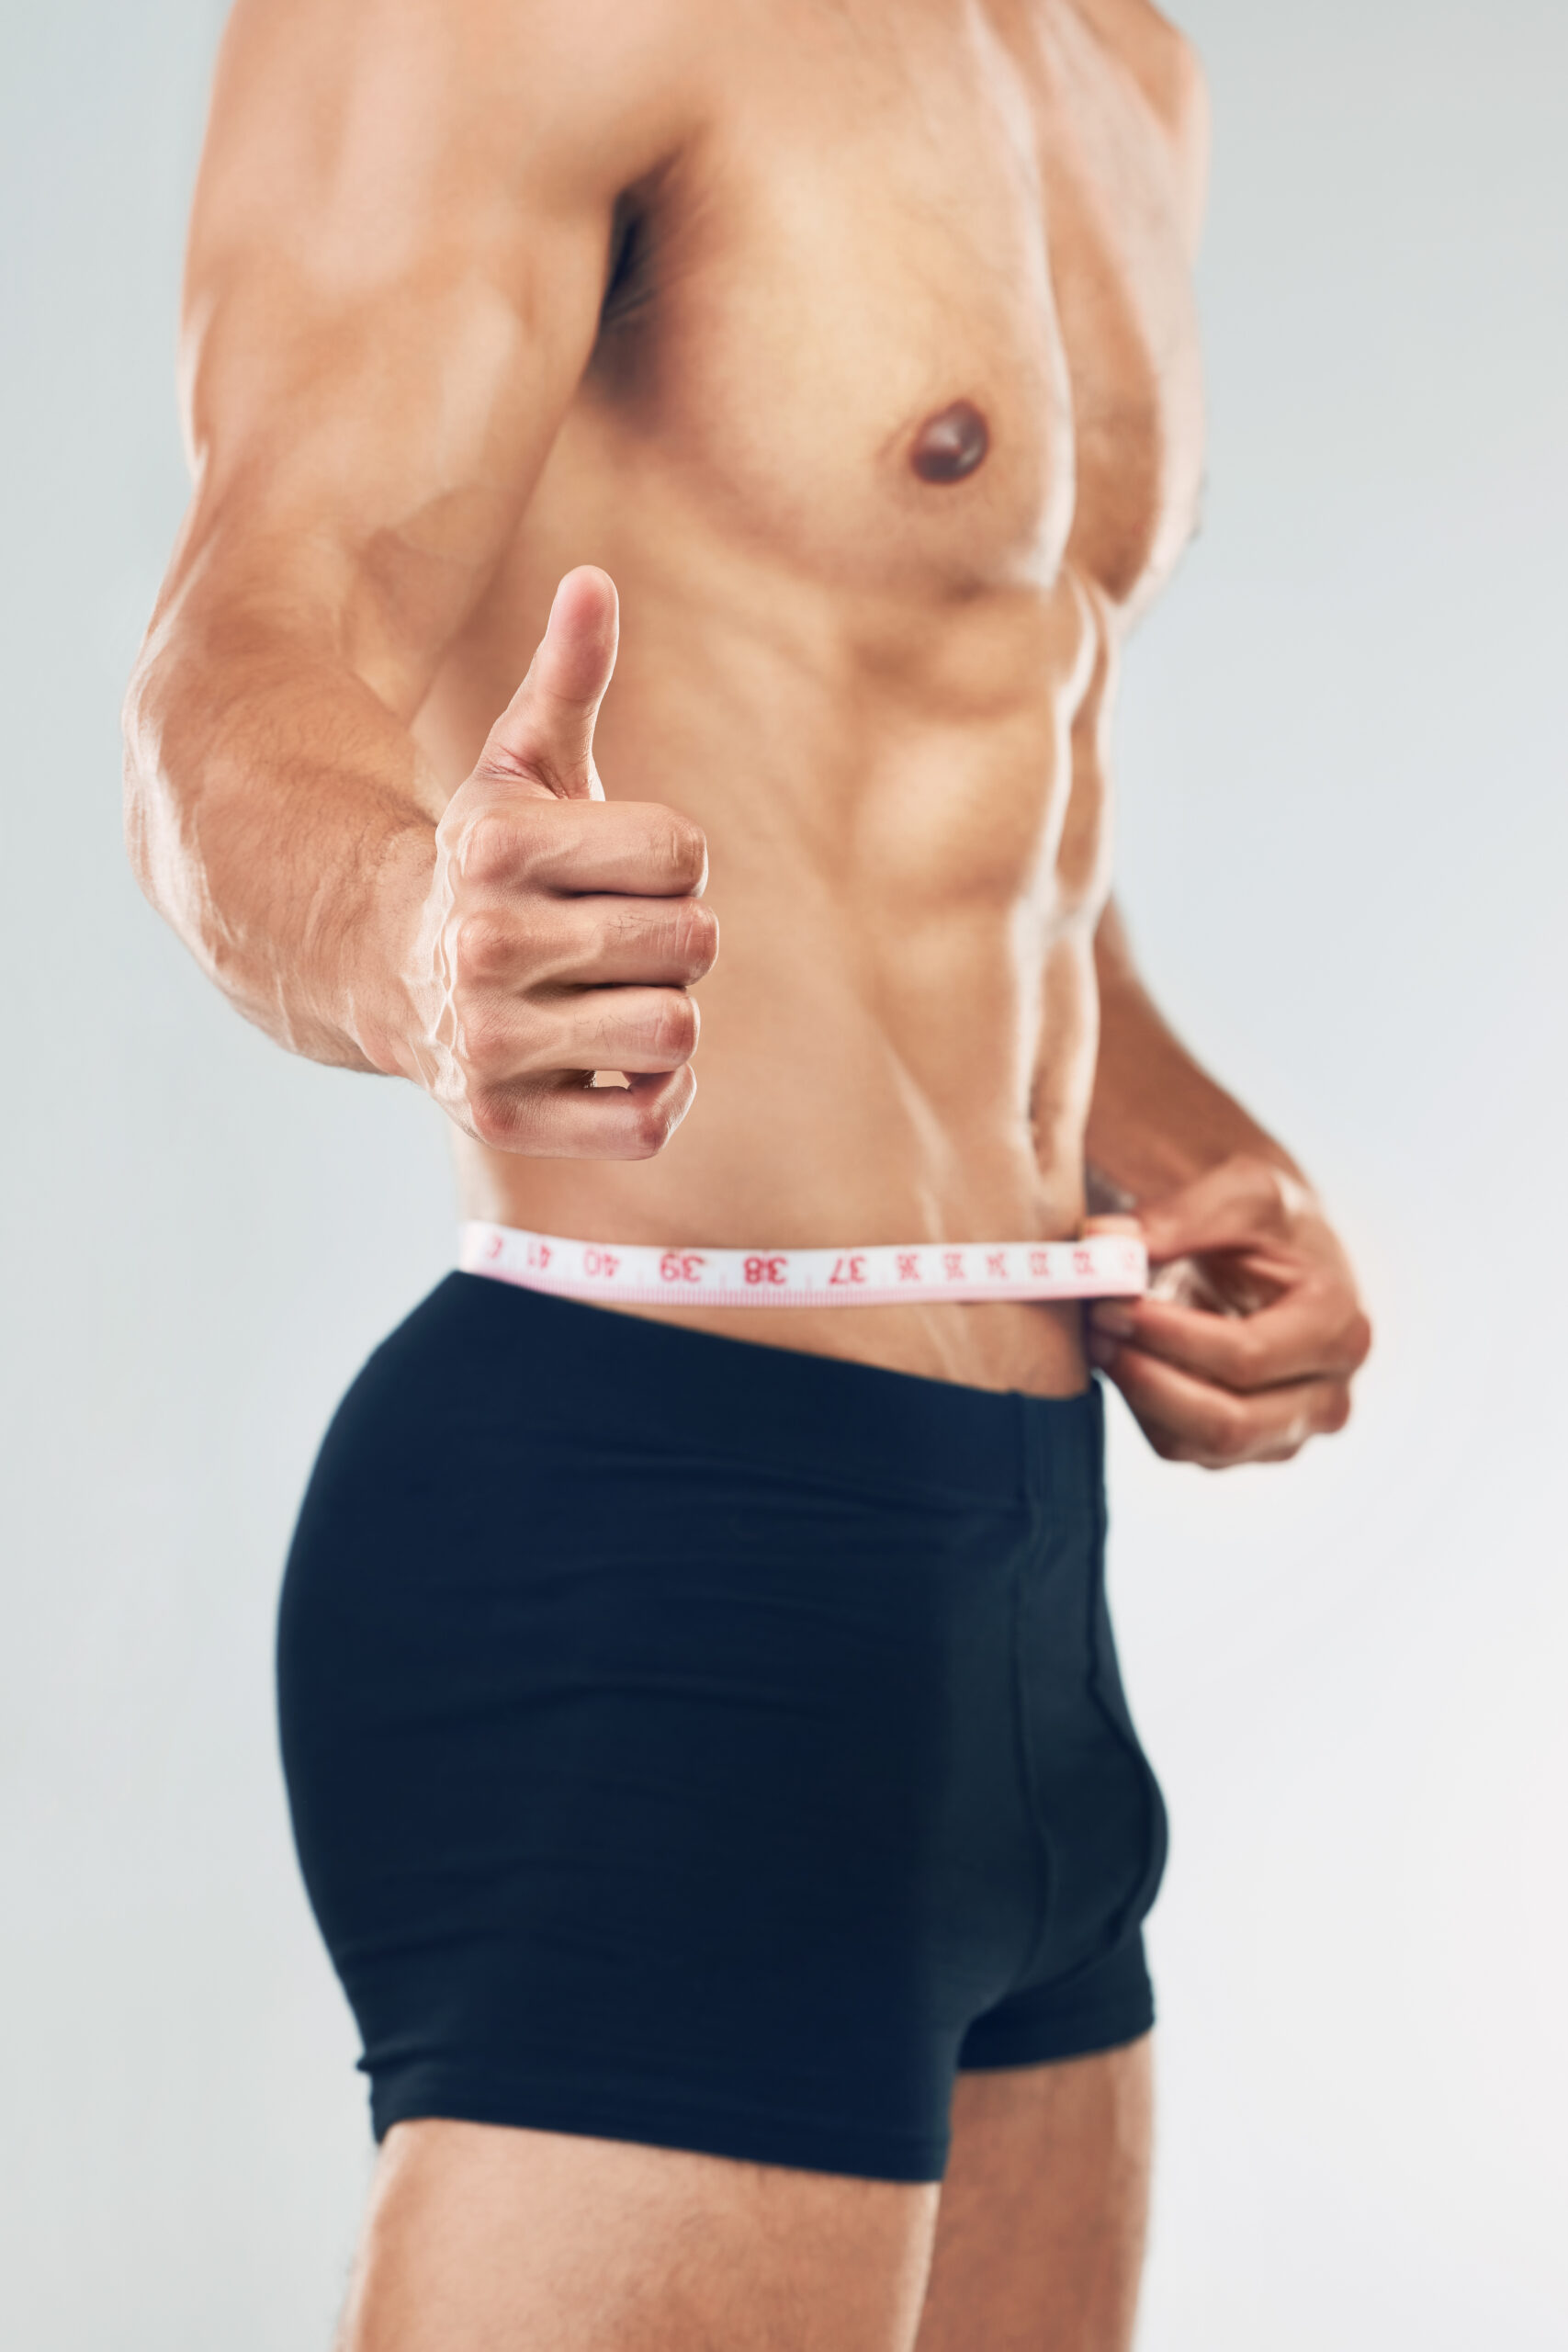 CoolSculpting vs. Semaglutide Injections in Northern Virginia